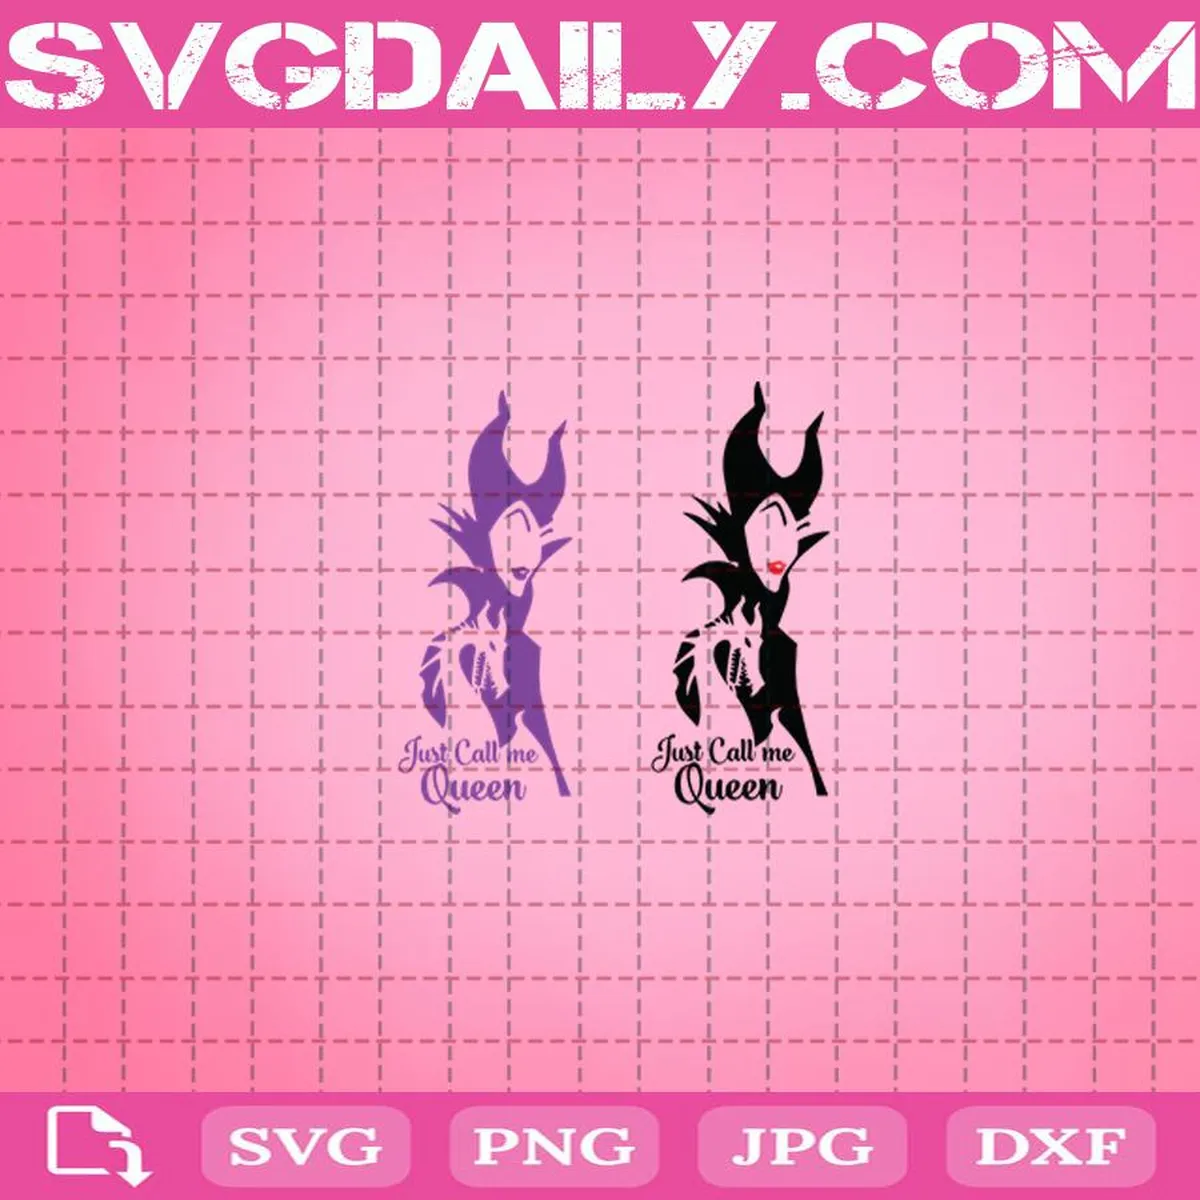 Maleficent Just Call Me Queen Svg, Just Call Me Queen Svg, Maleficent Svg, Disney Maleficent Svg, Cartoon Svg